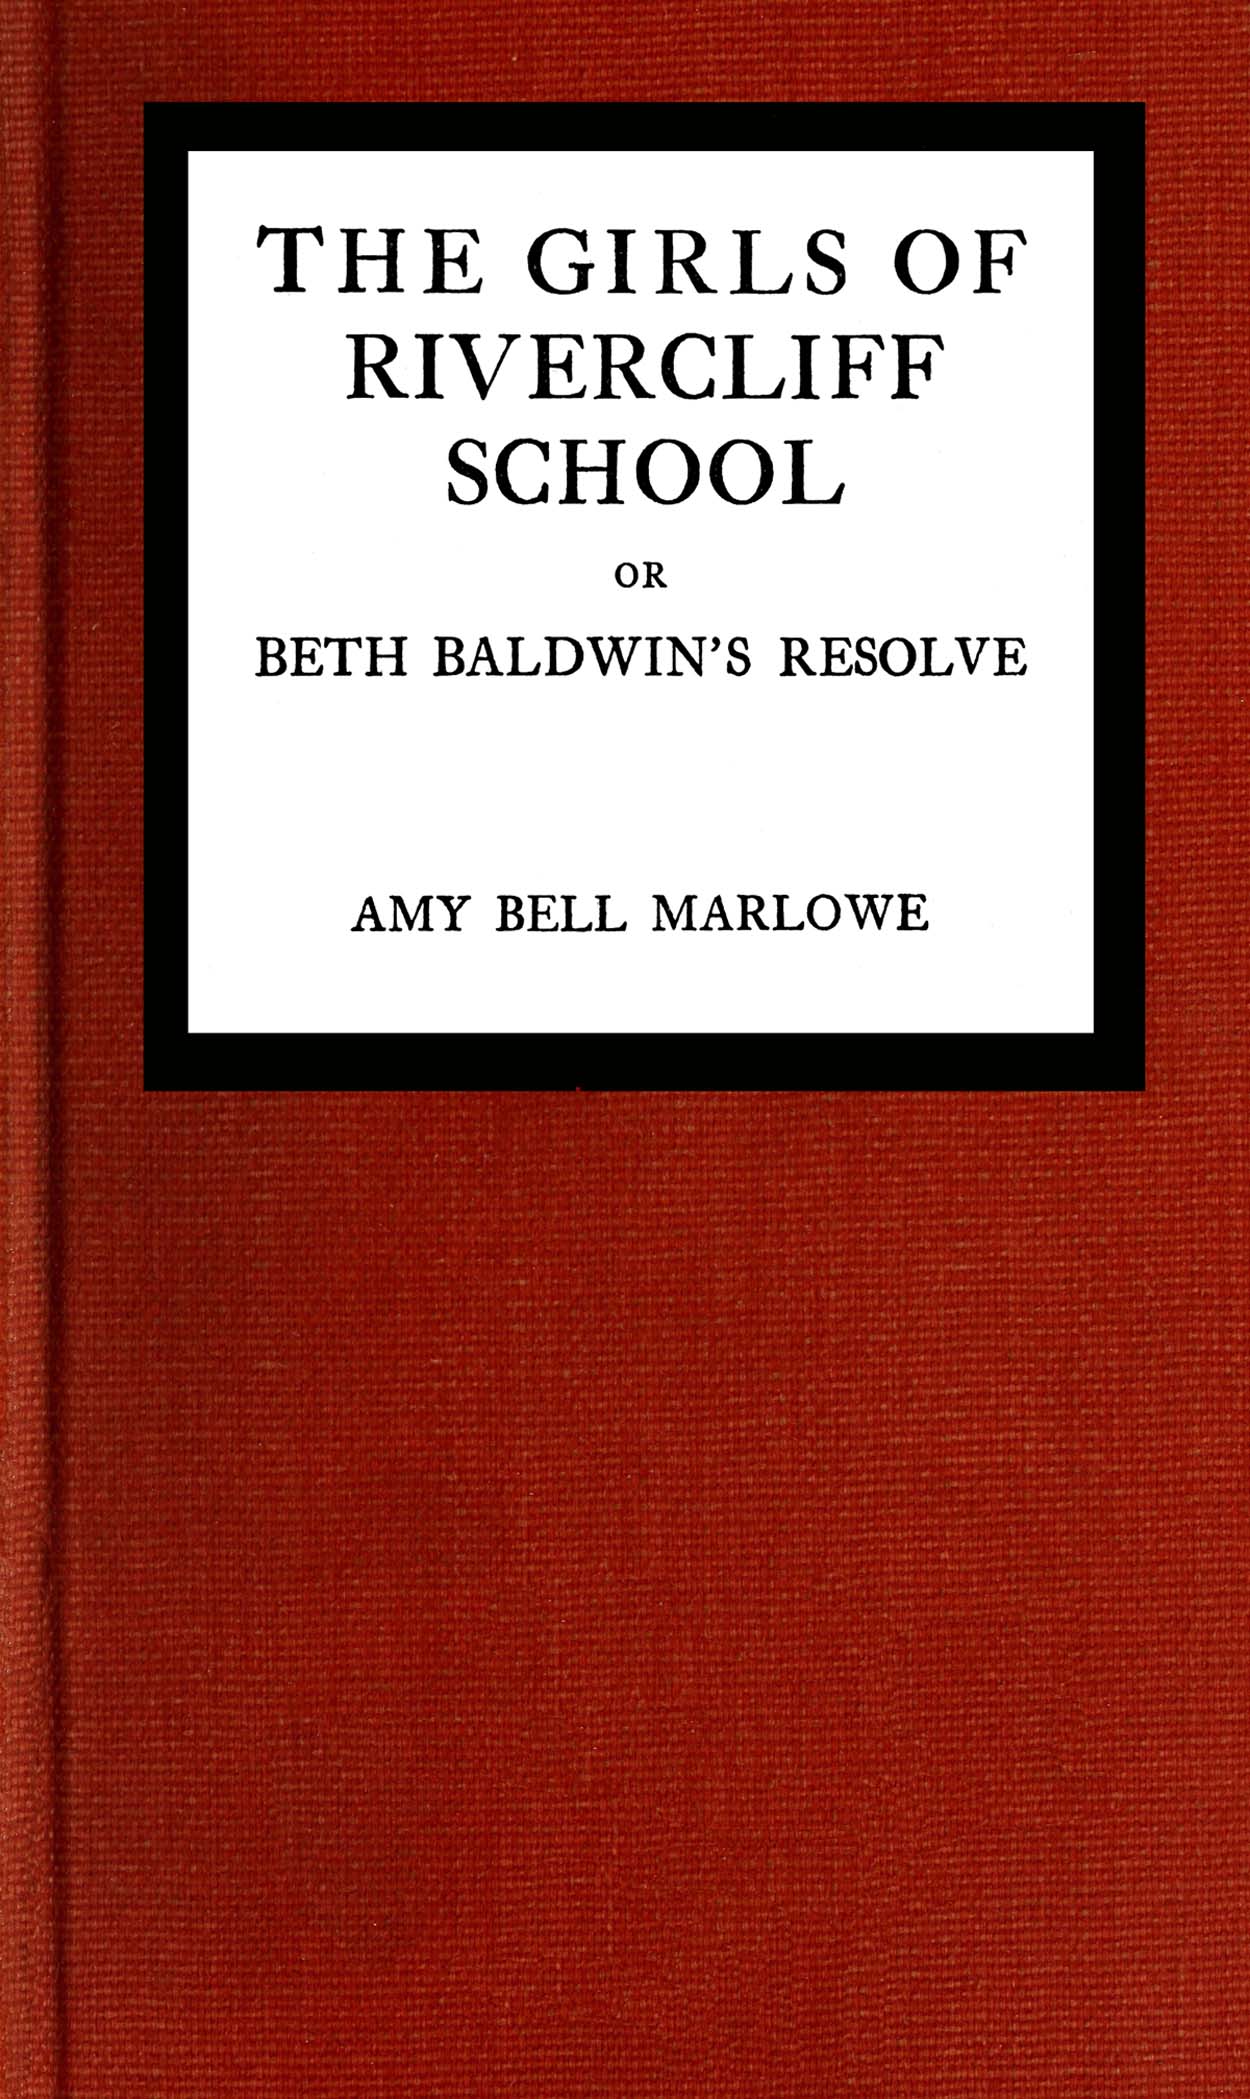 The girls of Rivercliff School, by Amy Bell Marlowe—A Project Gutenberg eBook pic